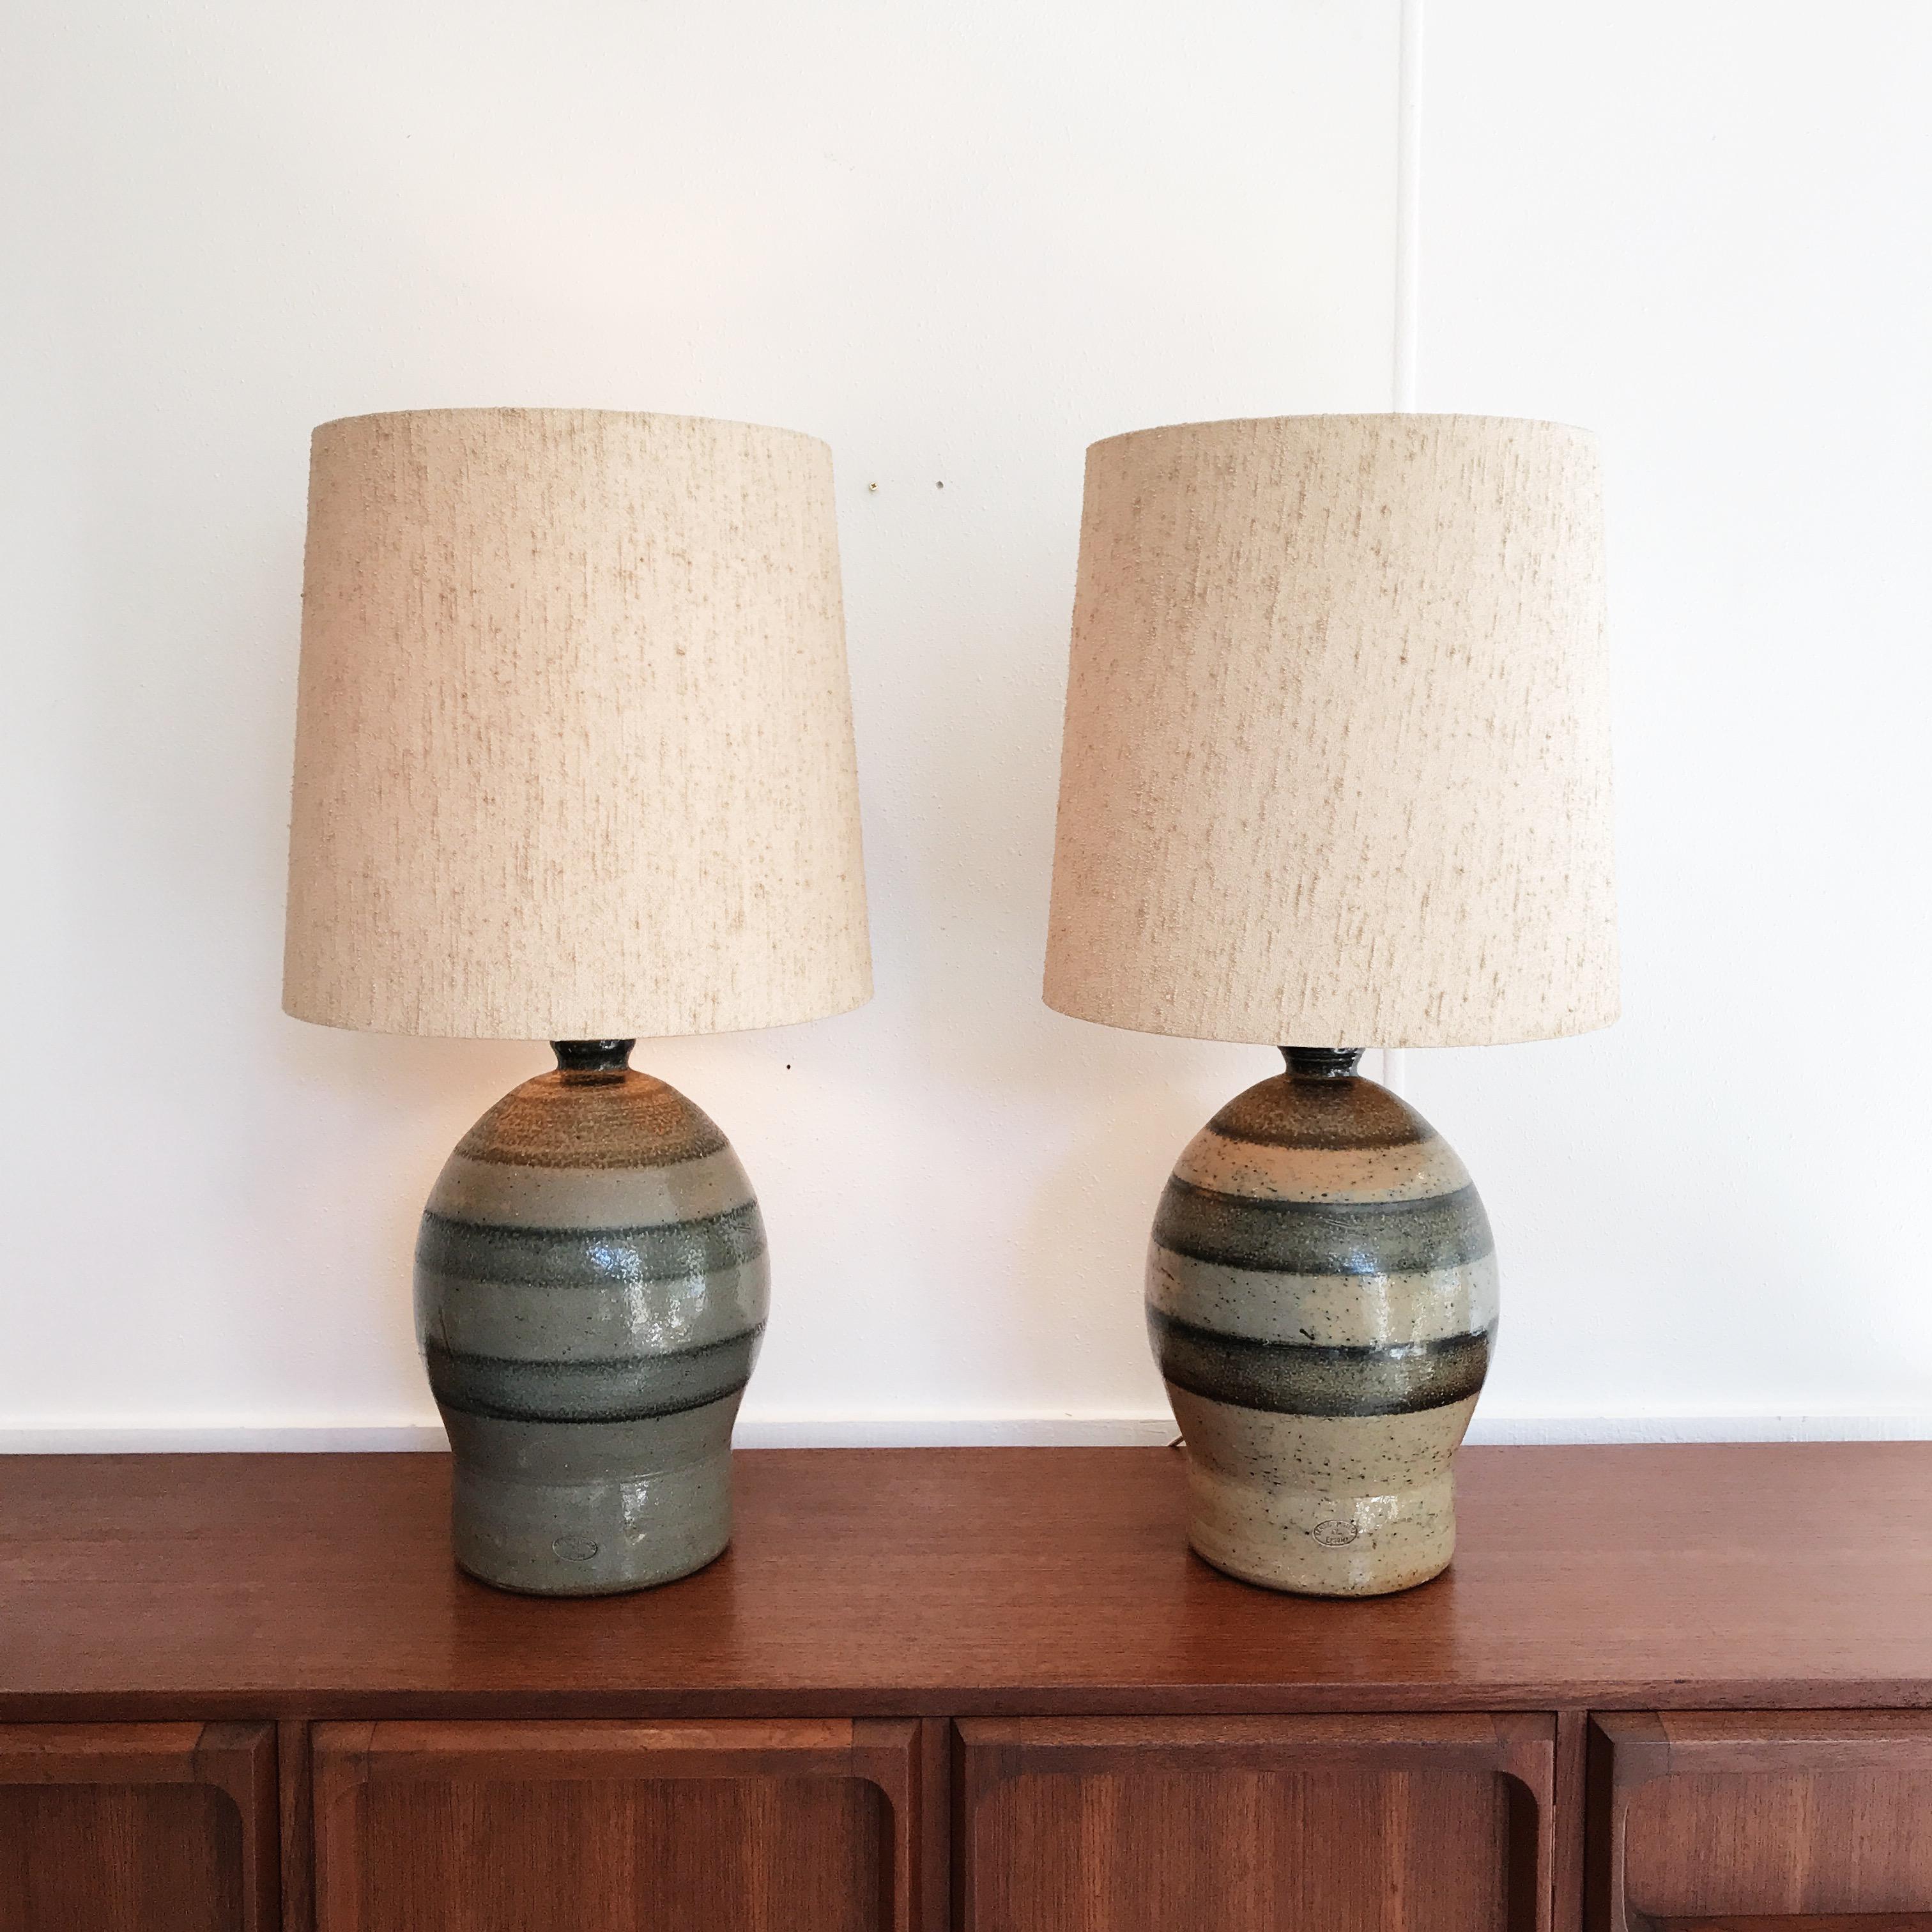 Australian Pair of Mid-20th Century Bendigo Pottery Table Lamps with Period Textured Shades